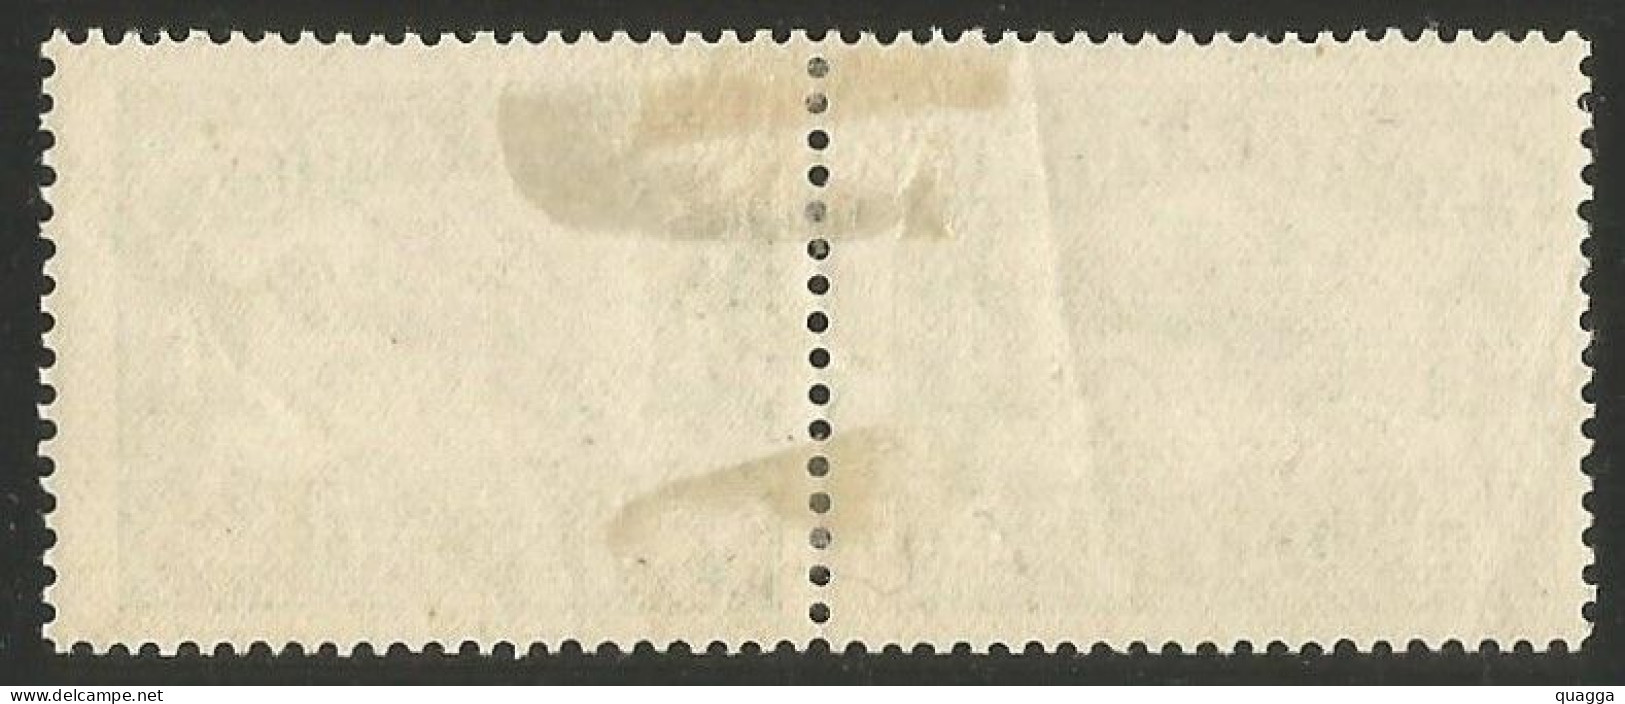 South Africa 1929. 4d Green Showing Short 'I' In 'AIR'. (UHB 20 V2). SACC 40*, SG 40*. - Unused Stamps